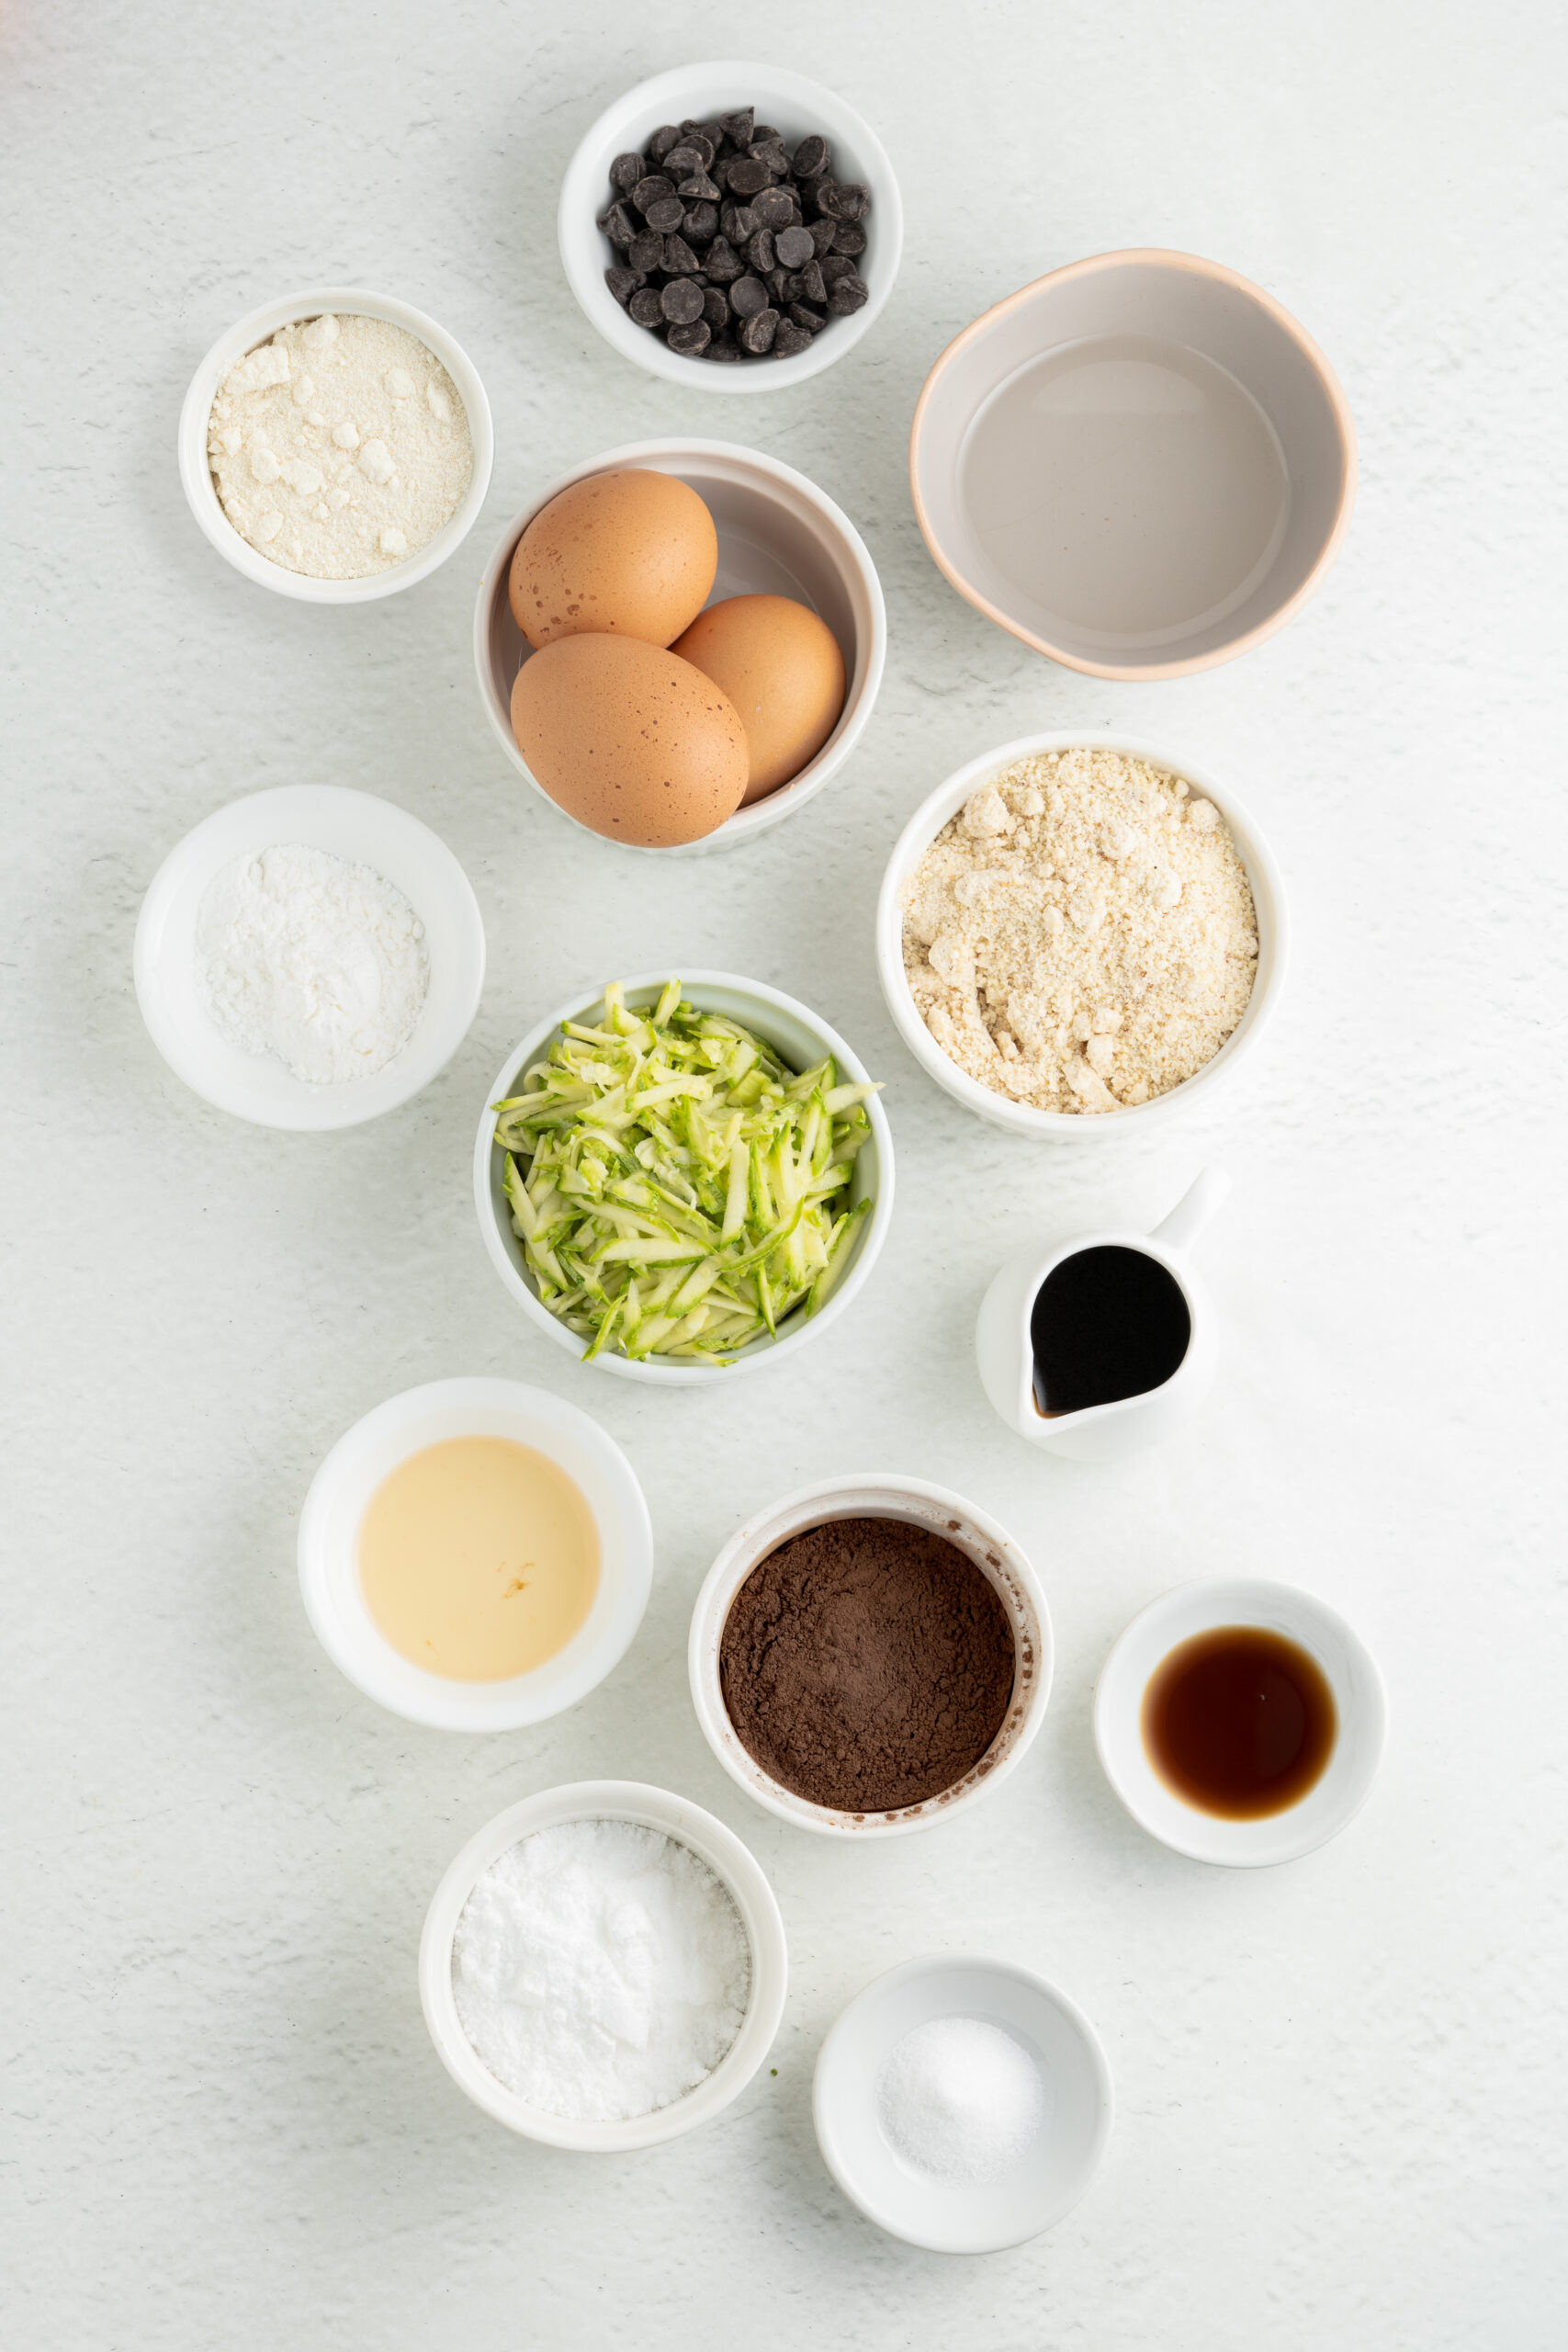 ingredients for chocolate zucchini bread in small white bowls.